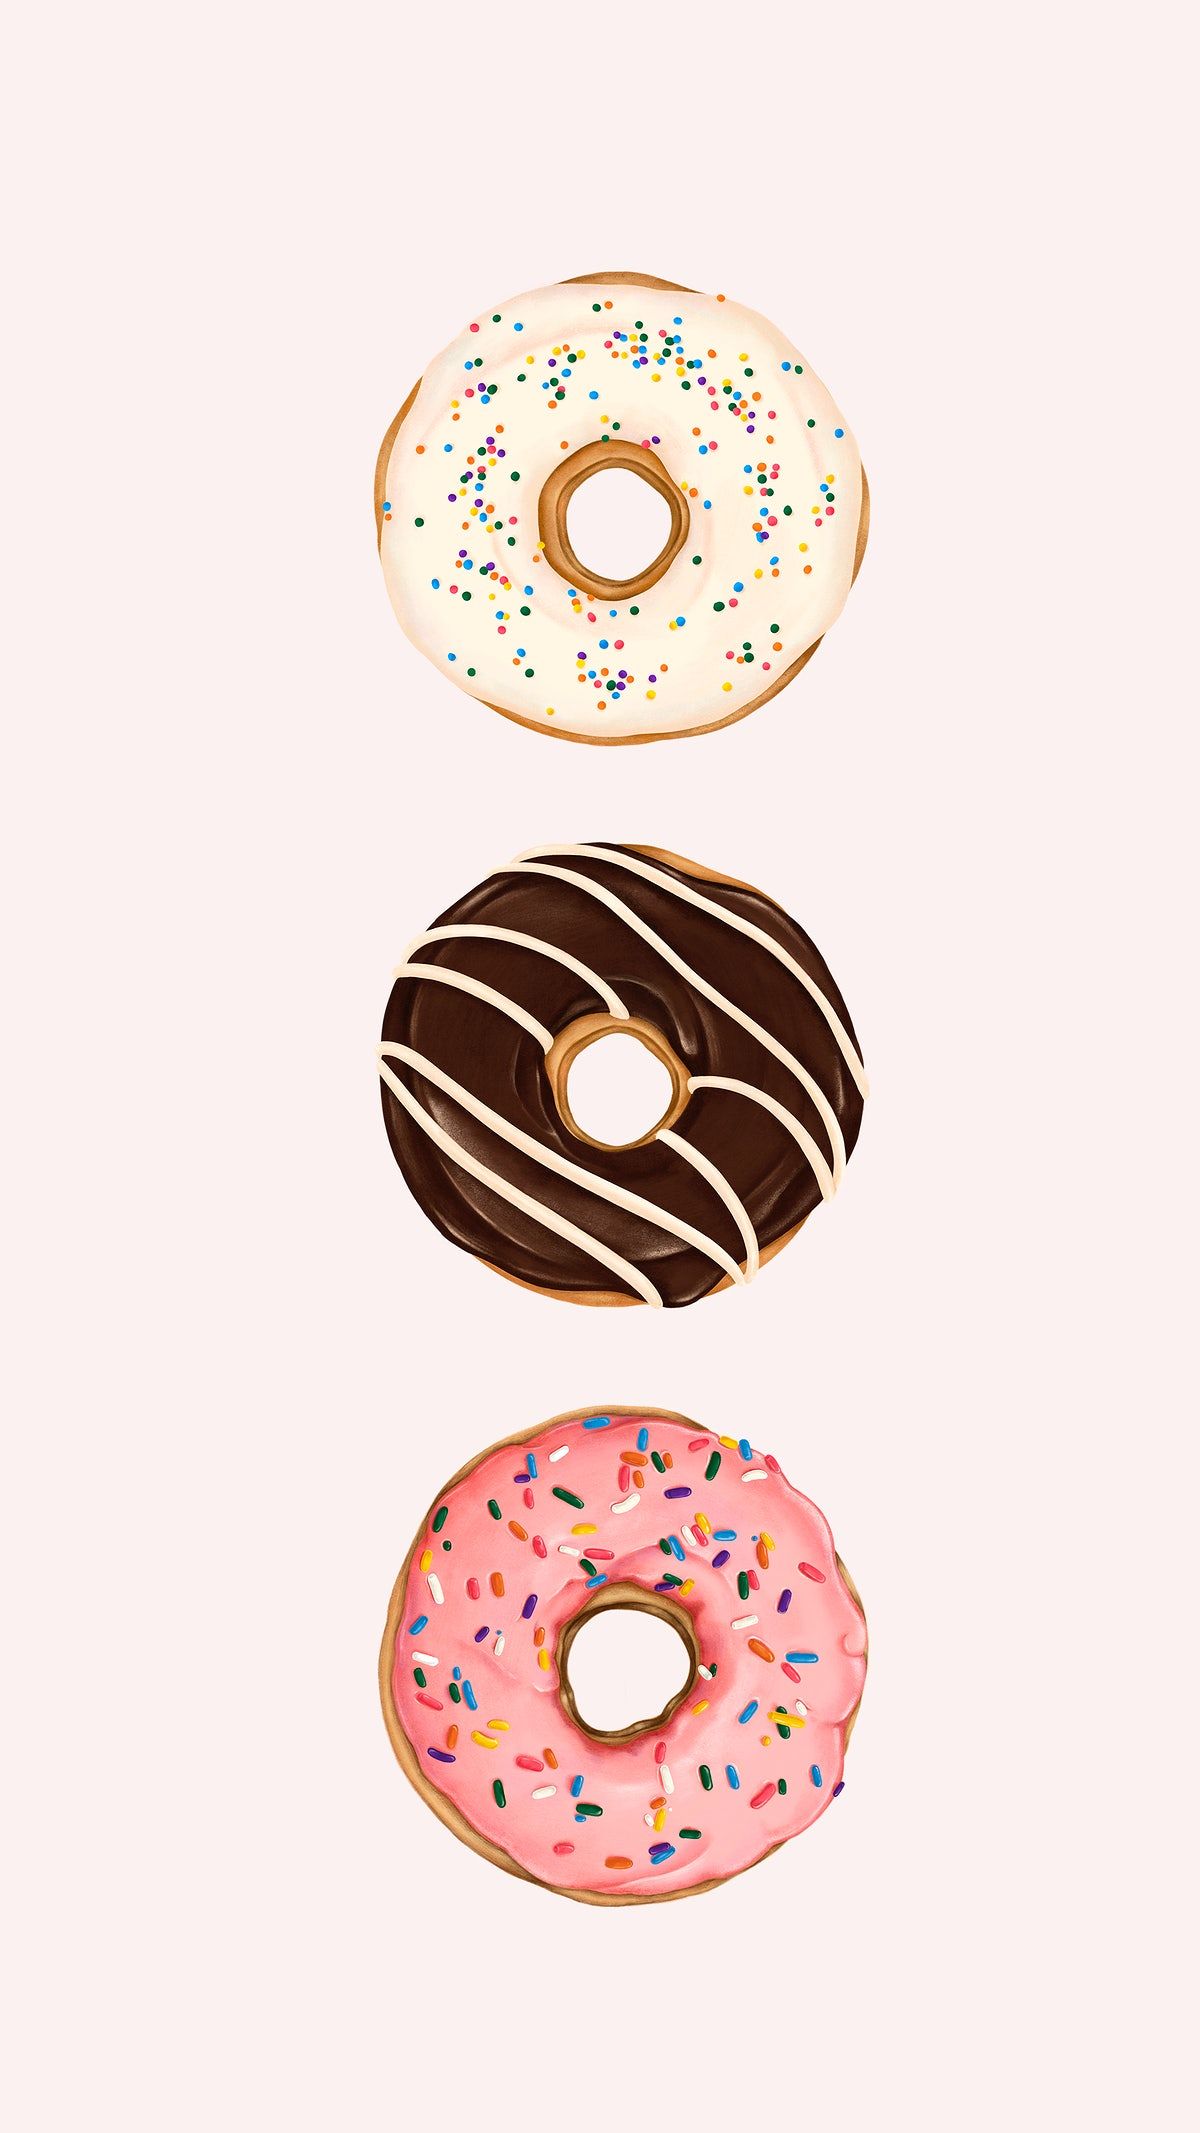 Donuts patterned mobile background